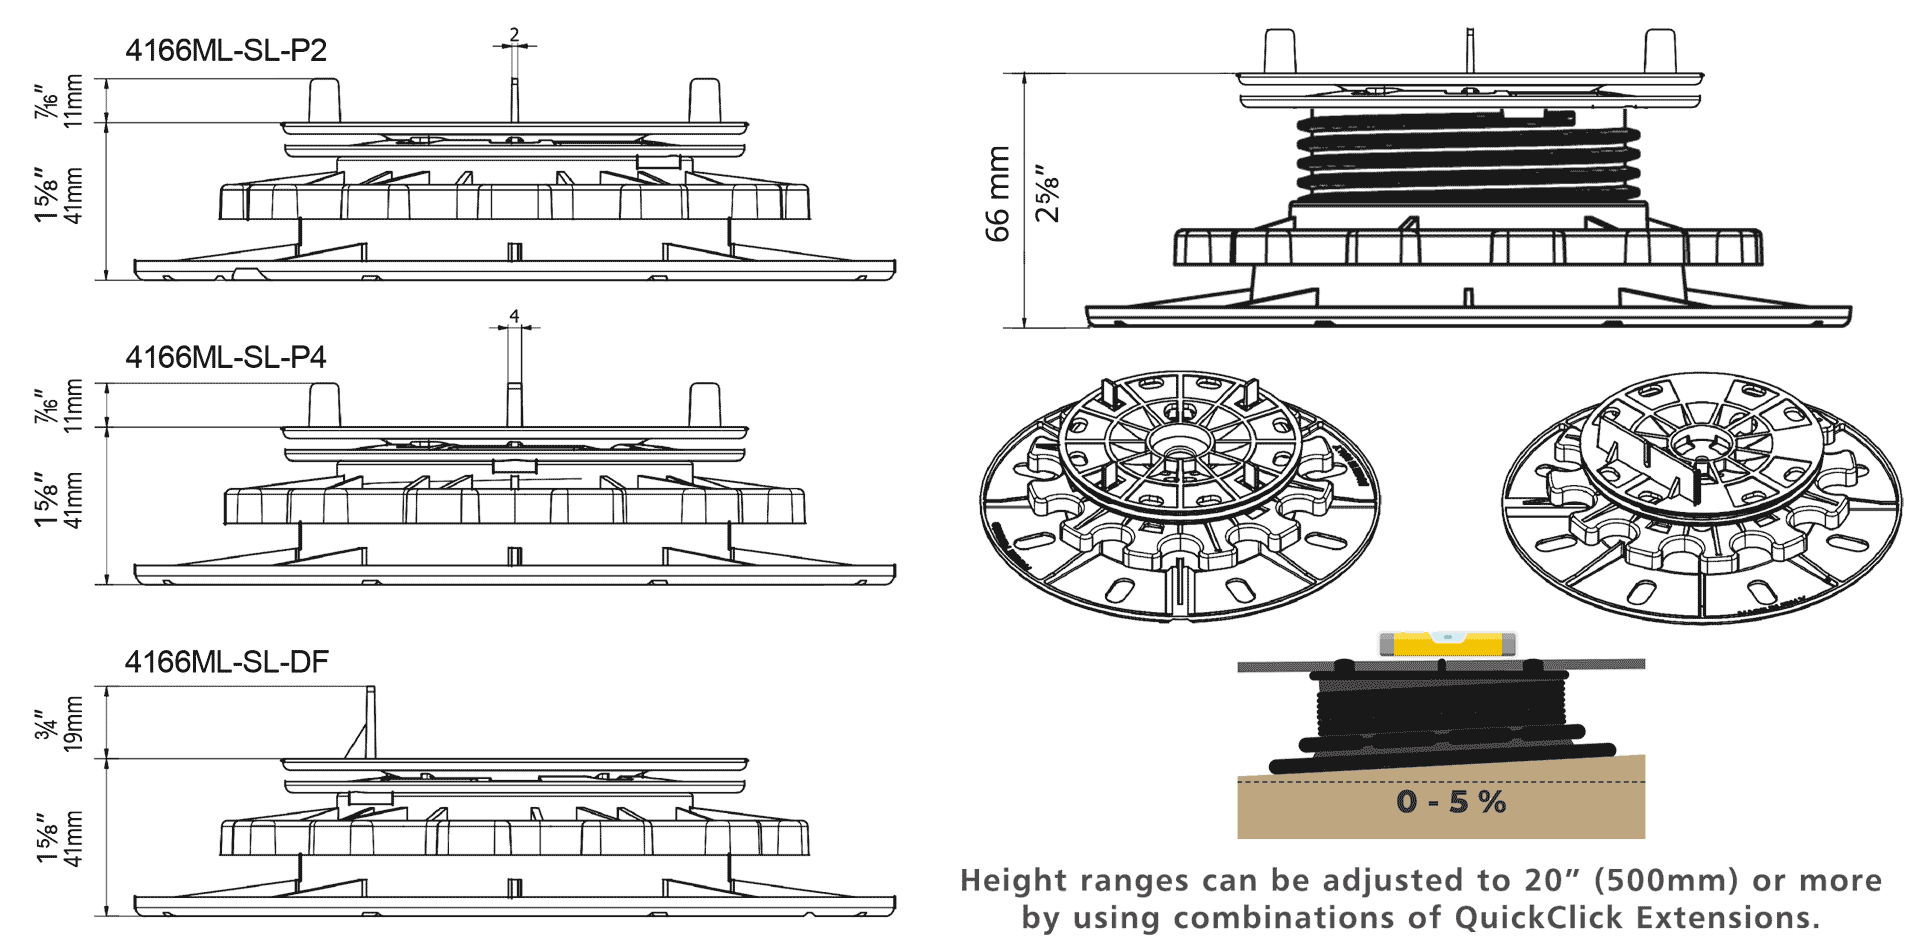 Technical drawings - StrataRise 4166 Self Levelling Pedestal supports